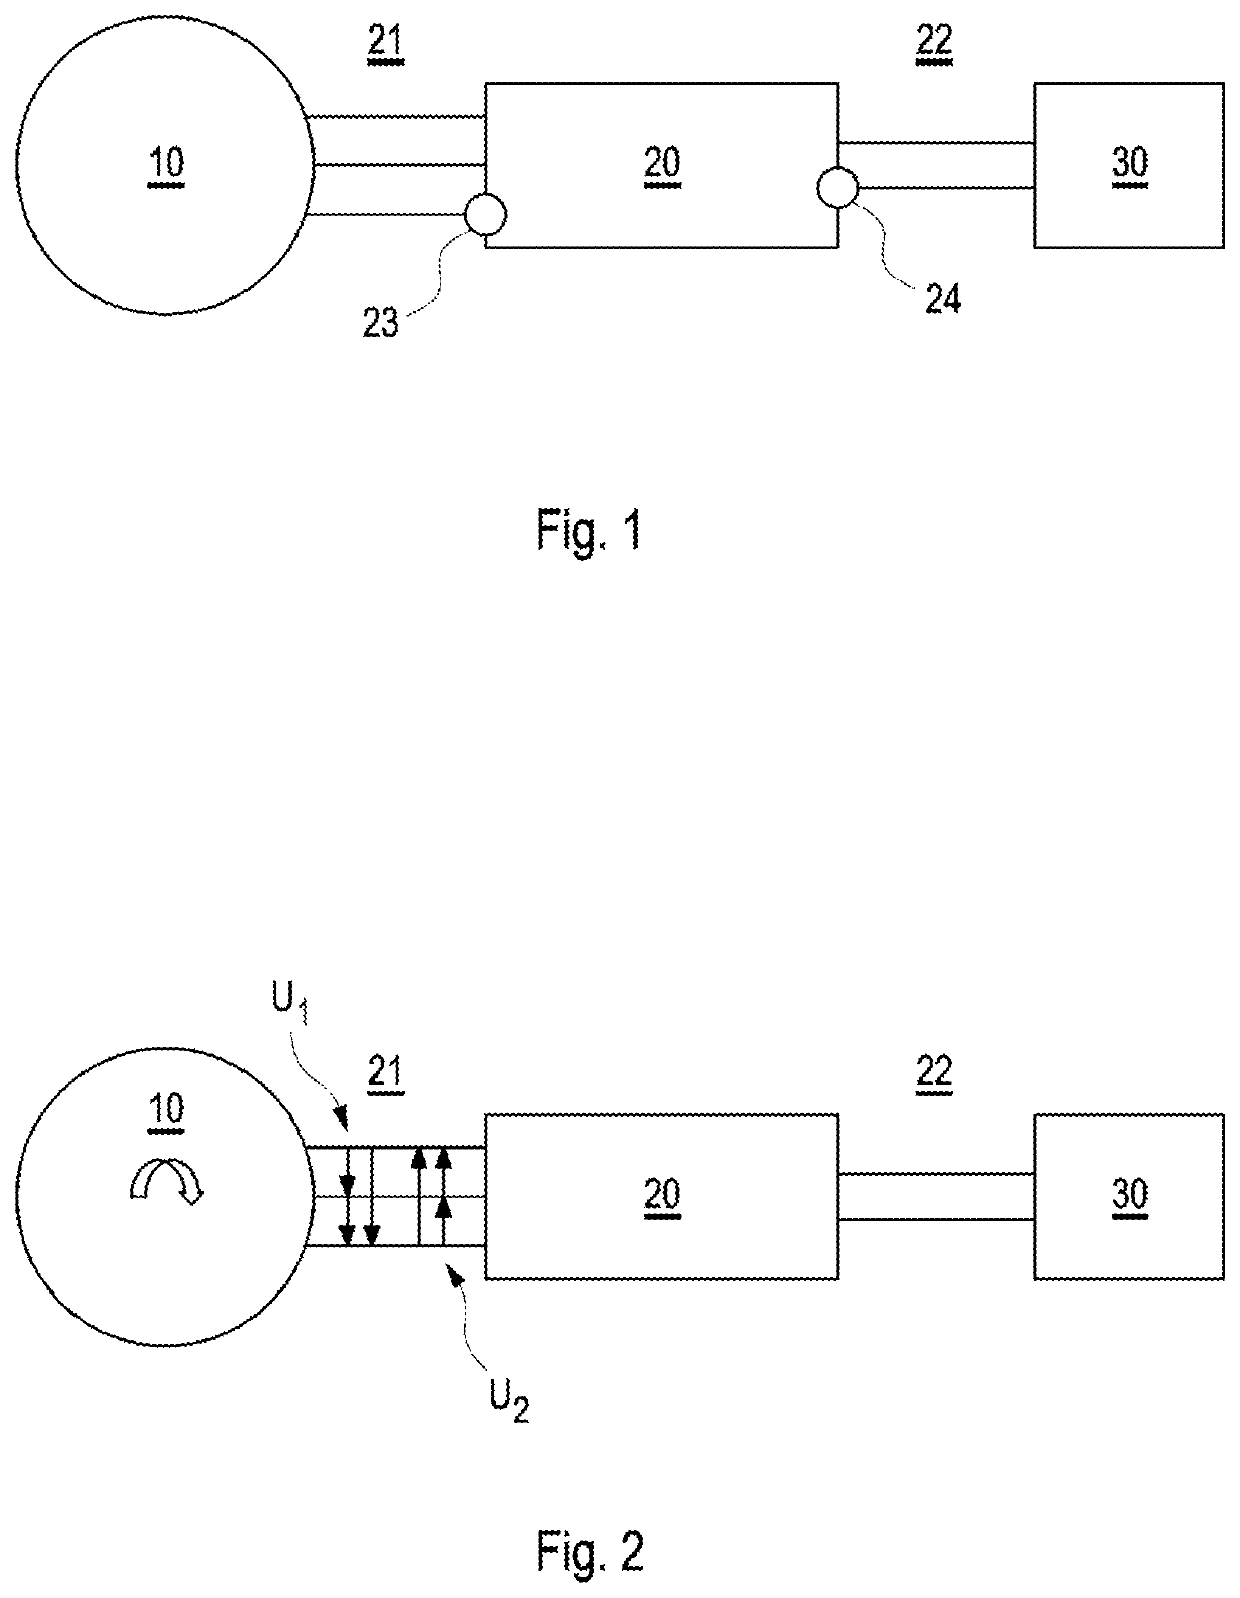 Determination of the rotor temperature of a permanent magnet synchronous machine